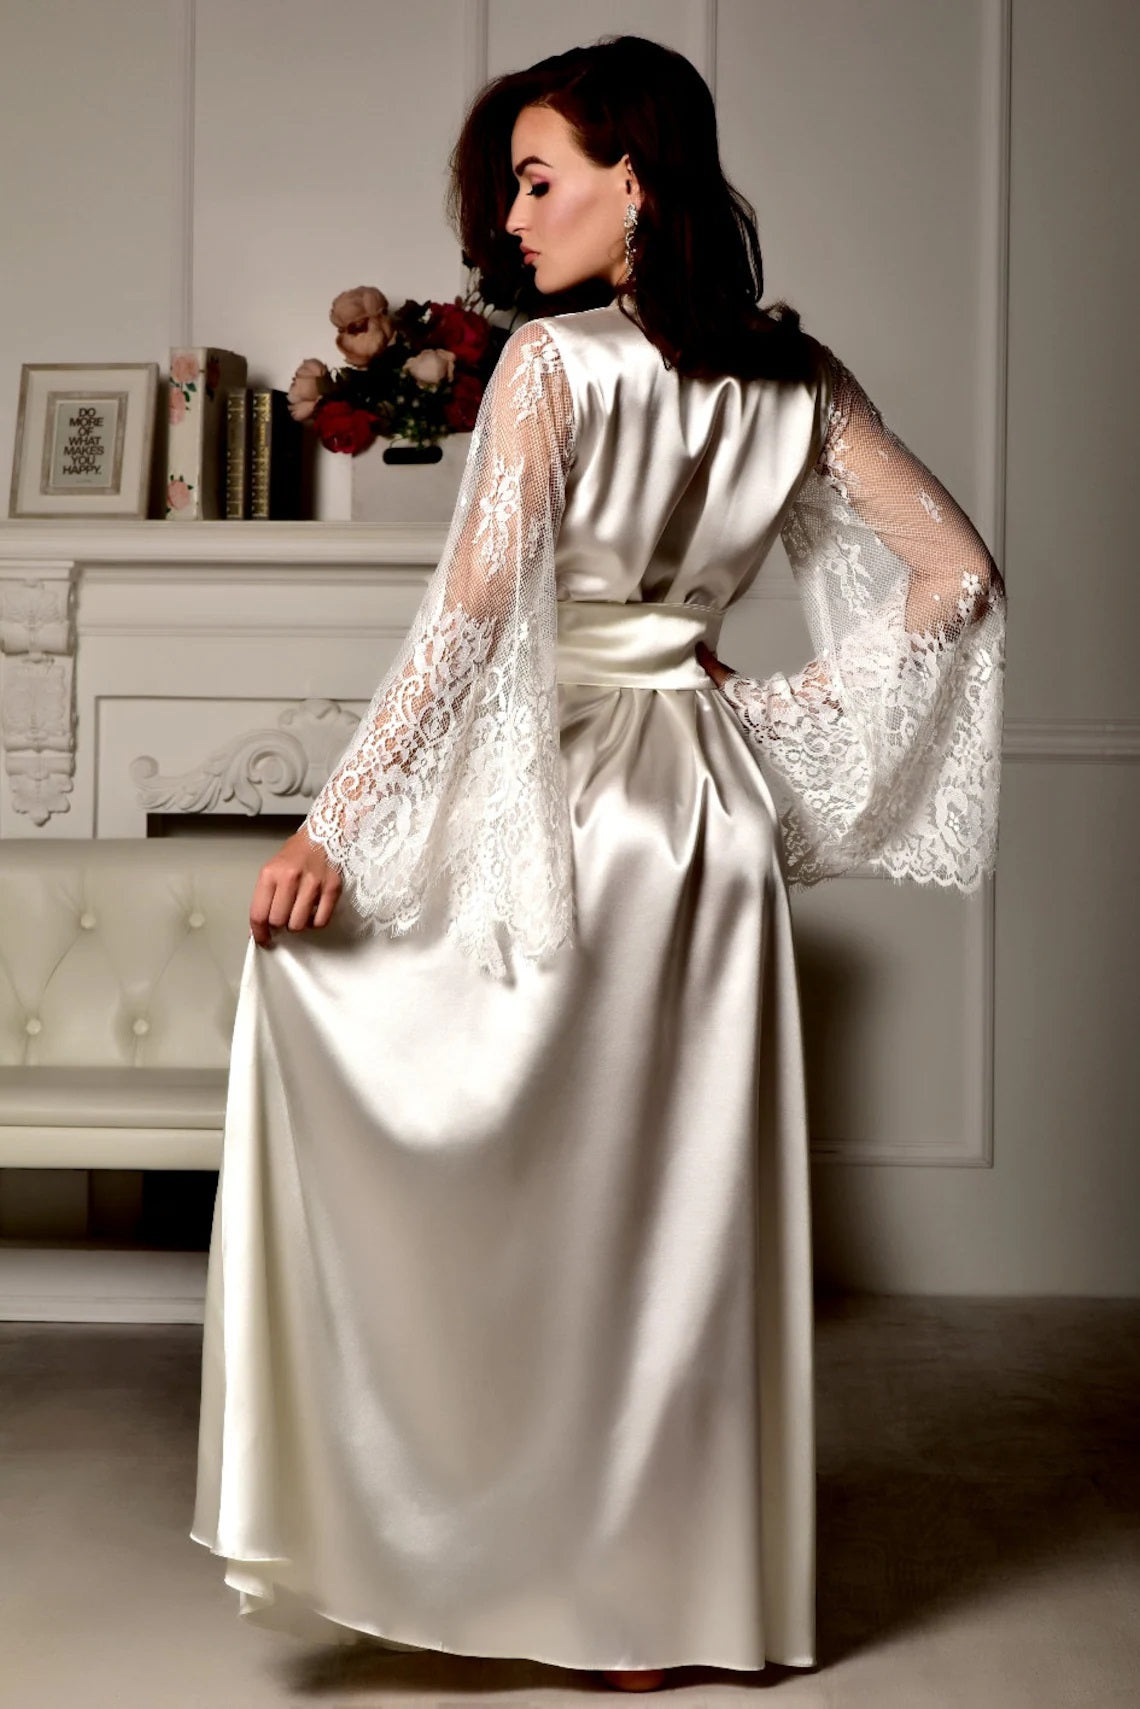 Bachelorette Party Vibes - Lace Bridal Robe Adding Glamour to the Celebration